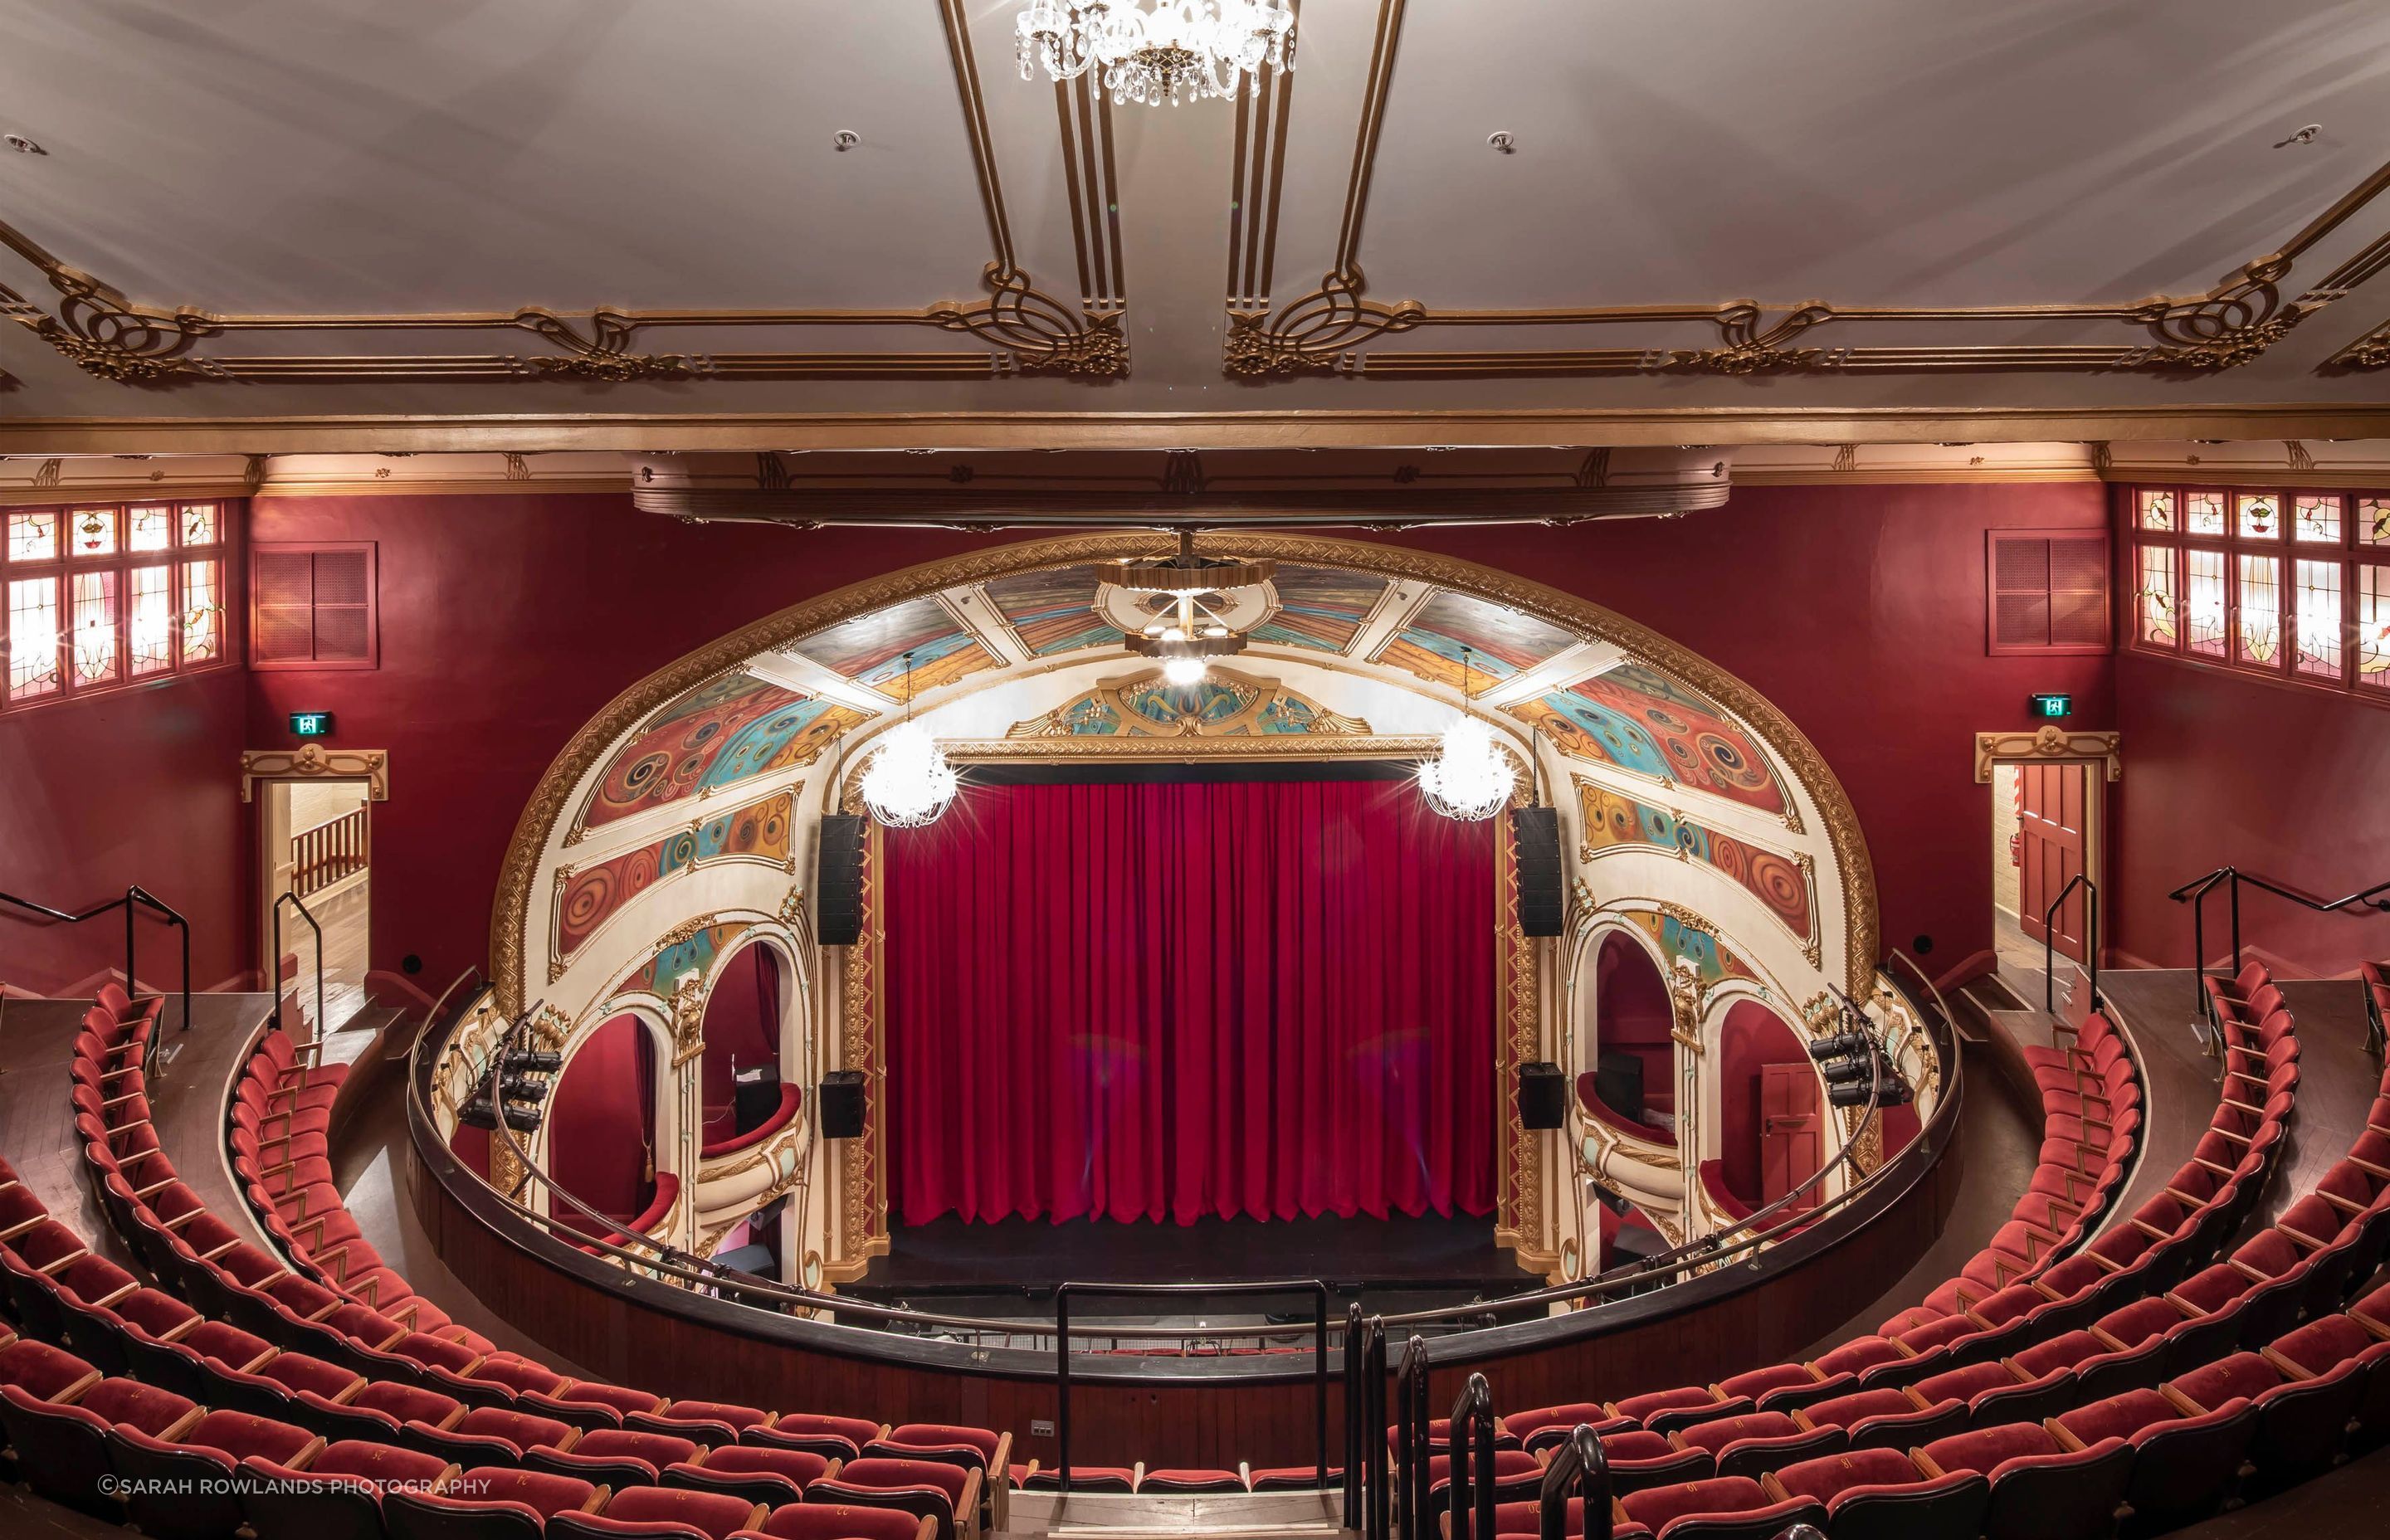 Over its 100-plus years, the theatre has undergone a number of modifications and upgrades. Beginning in the late 1990s, a sequence of major restoration works was completed, which included the painting of the theatre’s iconic auditorium ceiling by artist T